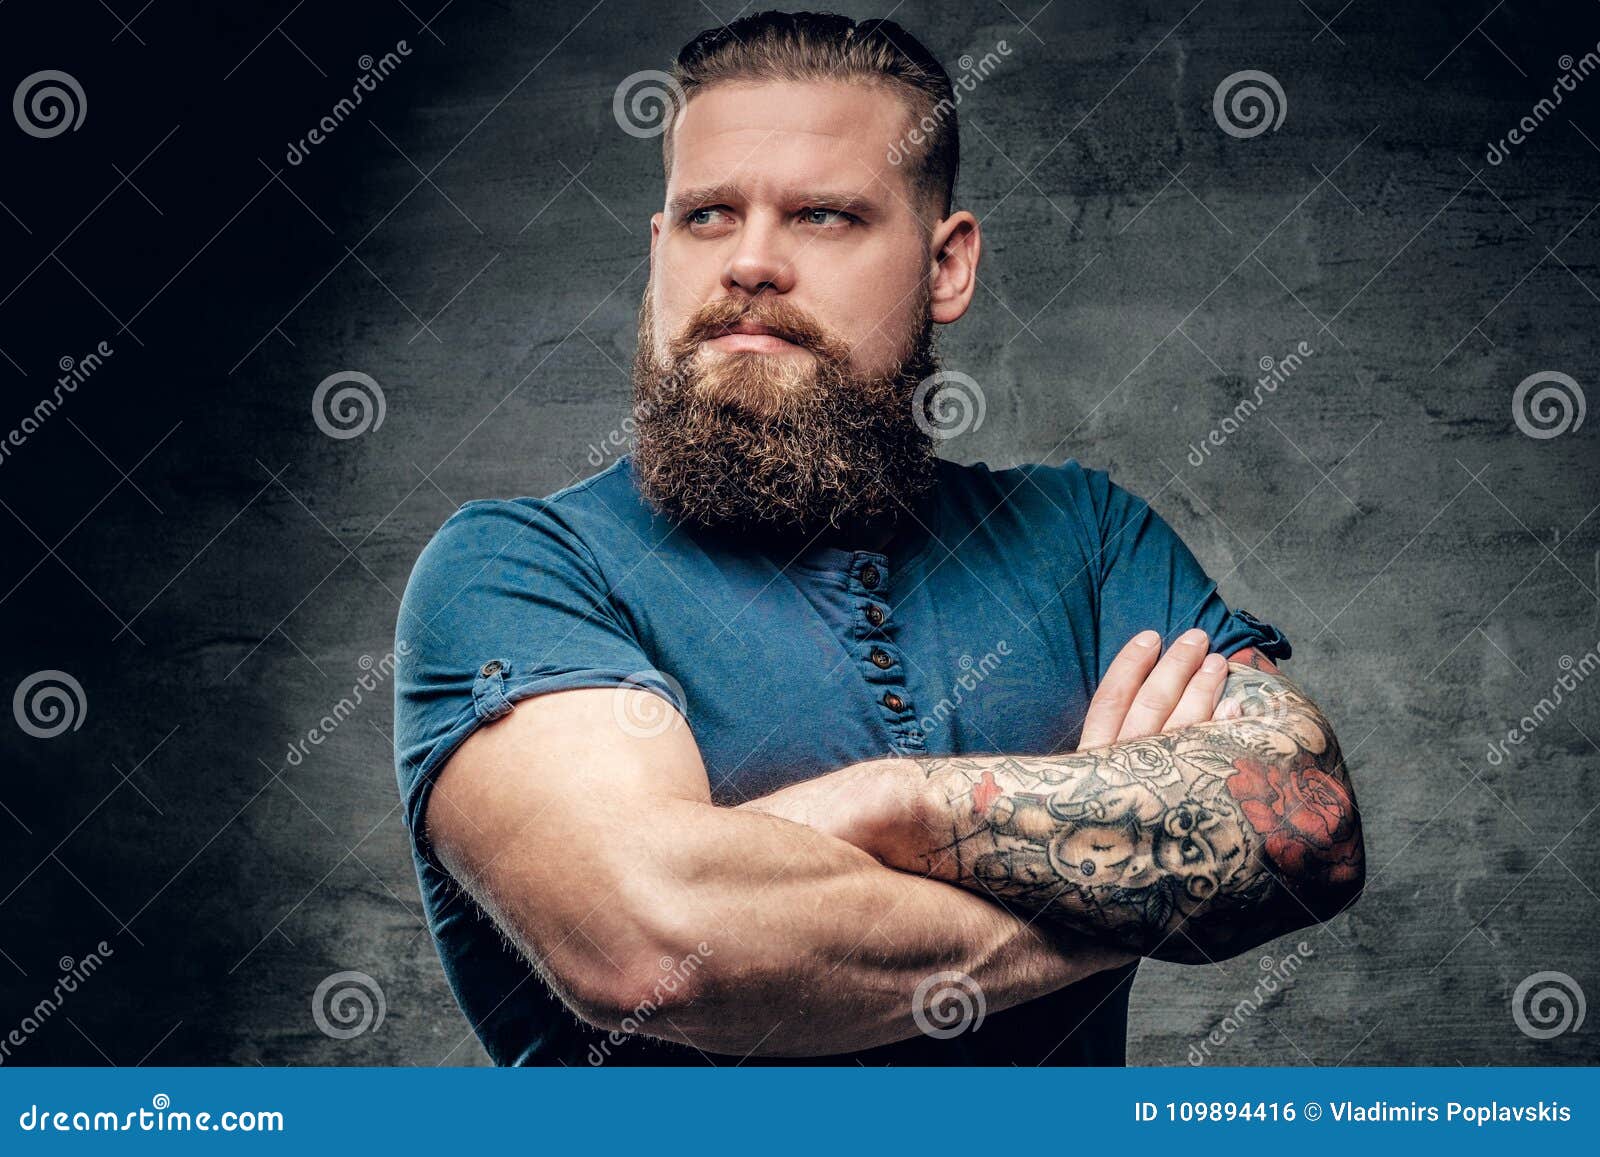 Bearded Fat Male with Tattoo on Arms. Stock Photo - Image of guys, beard: 109894416